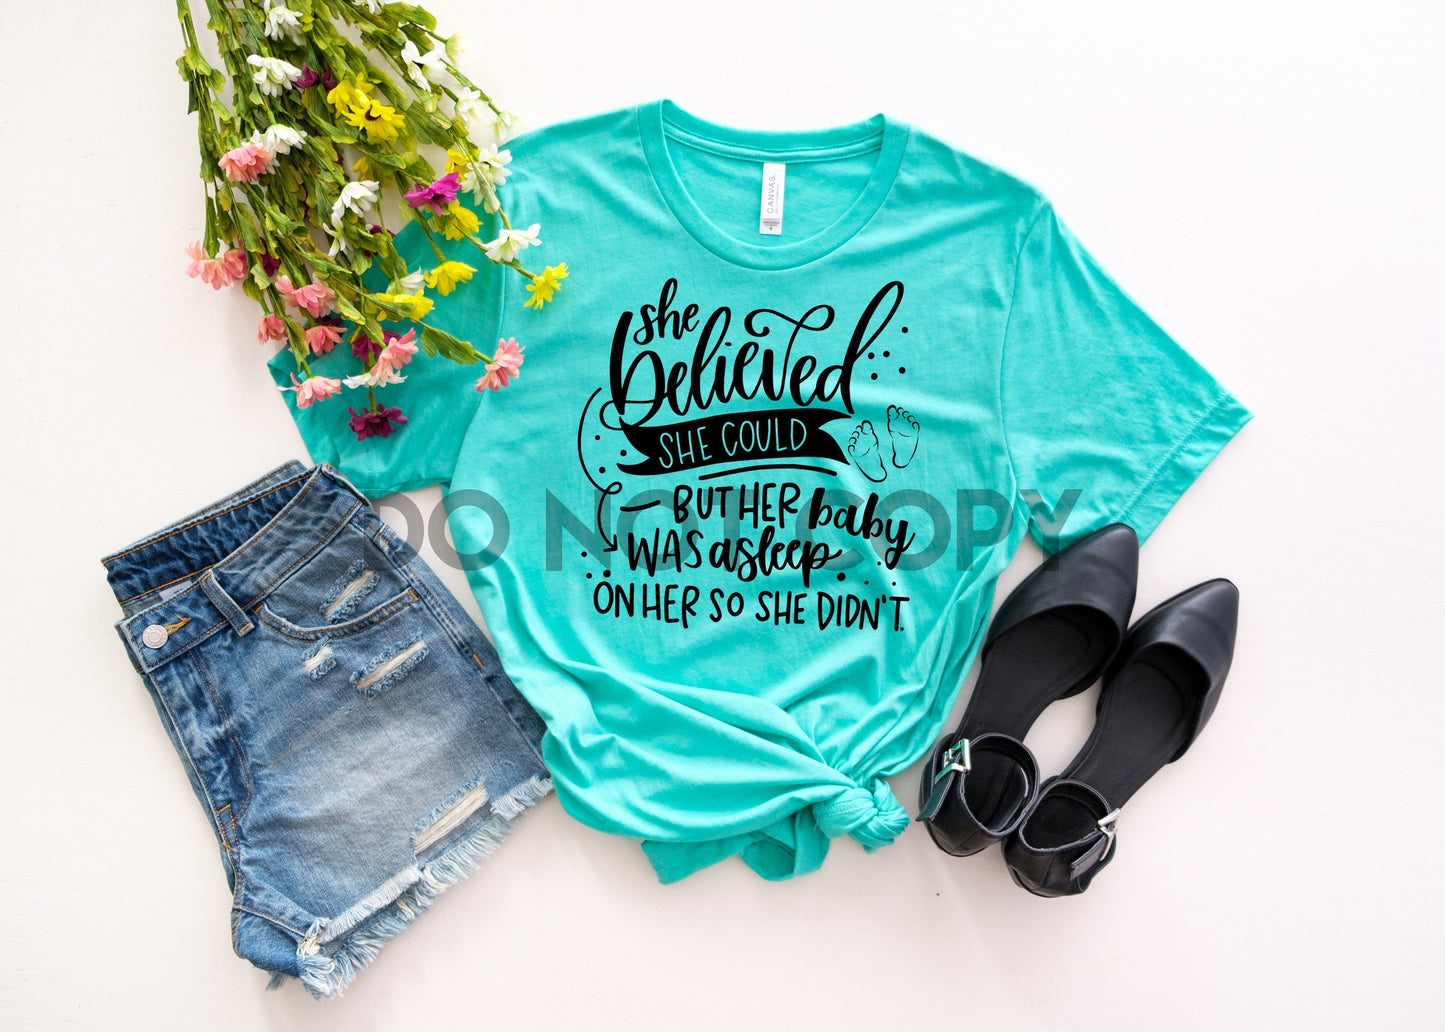 She believed she could but her baby was asleep on her so she didn't one color Screen Print plastisol transfer